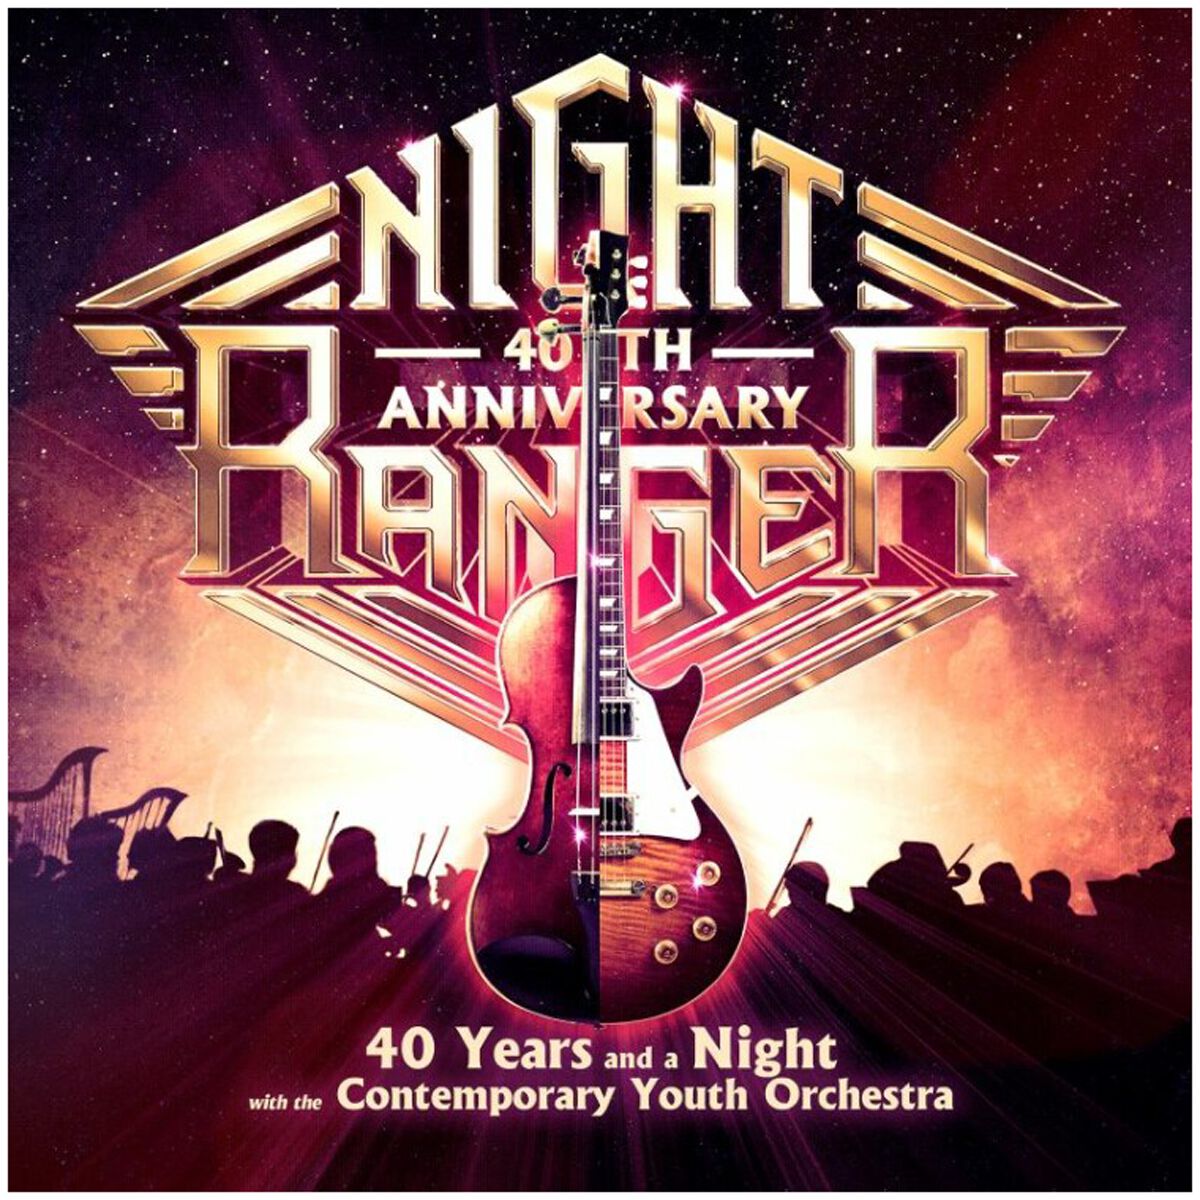 NIGHT RANGER '40 Years and a Night with the Contemporary Youth Orchestra' album review:
eternal-terror.com/2023/12/19/nig…
#frontiersrecords #melodicrock #melodichardrock #livealbumreview @nightranger #nightrangerband #classicrock #melodicheavymetal #symphonicrock